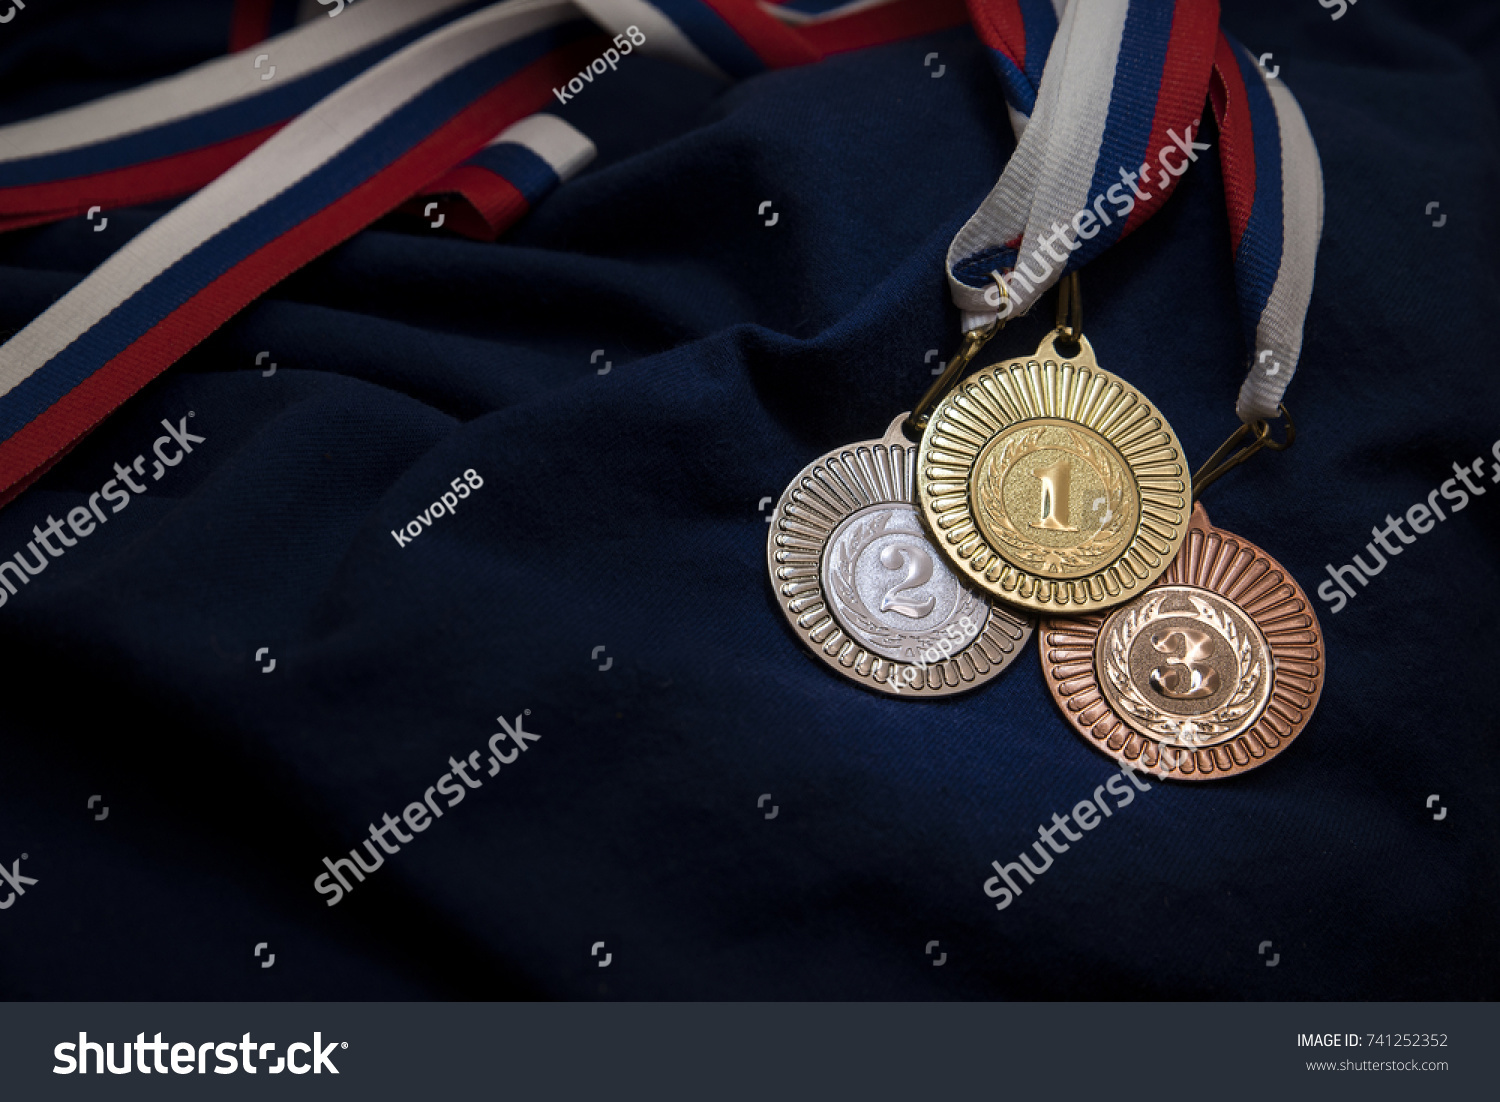 Gold, silver and bronze medal with numbers One, Two and Three. Sport trophy. Blue background. Original photo for winter olympic game in pyeongchang 2018. #741252352